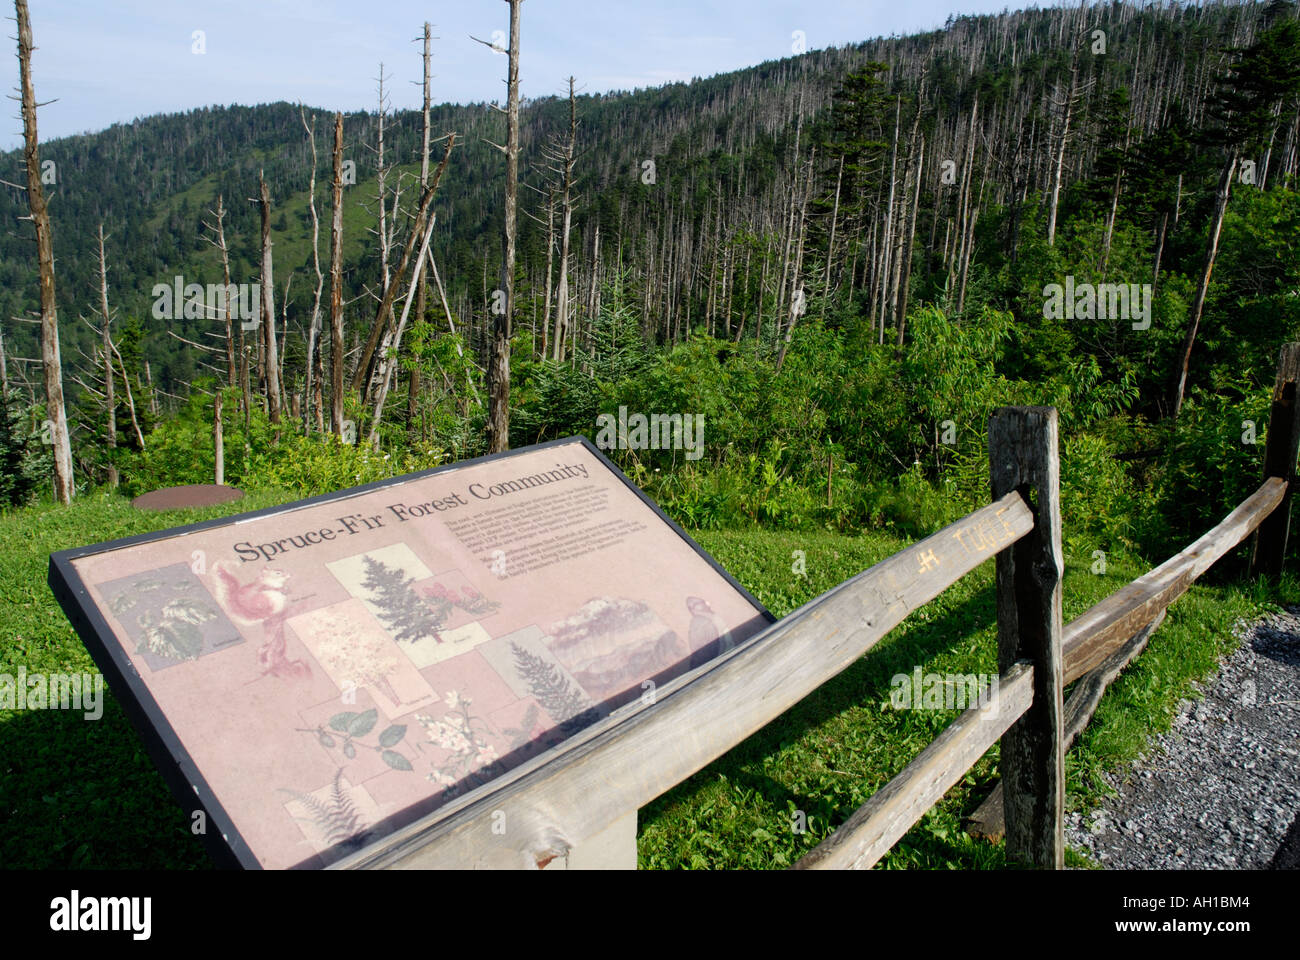 Interpretive sign along Clingman's Dome Trail, Great Smoky Mountains National Park Stock Photo